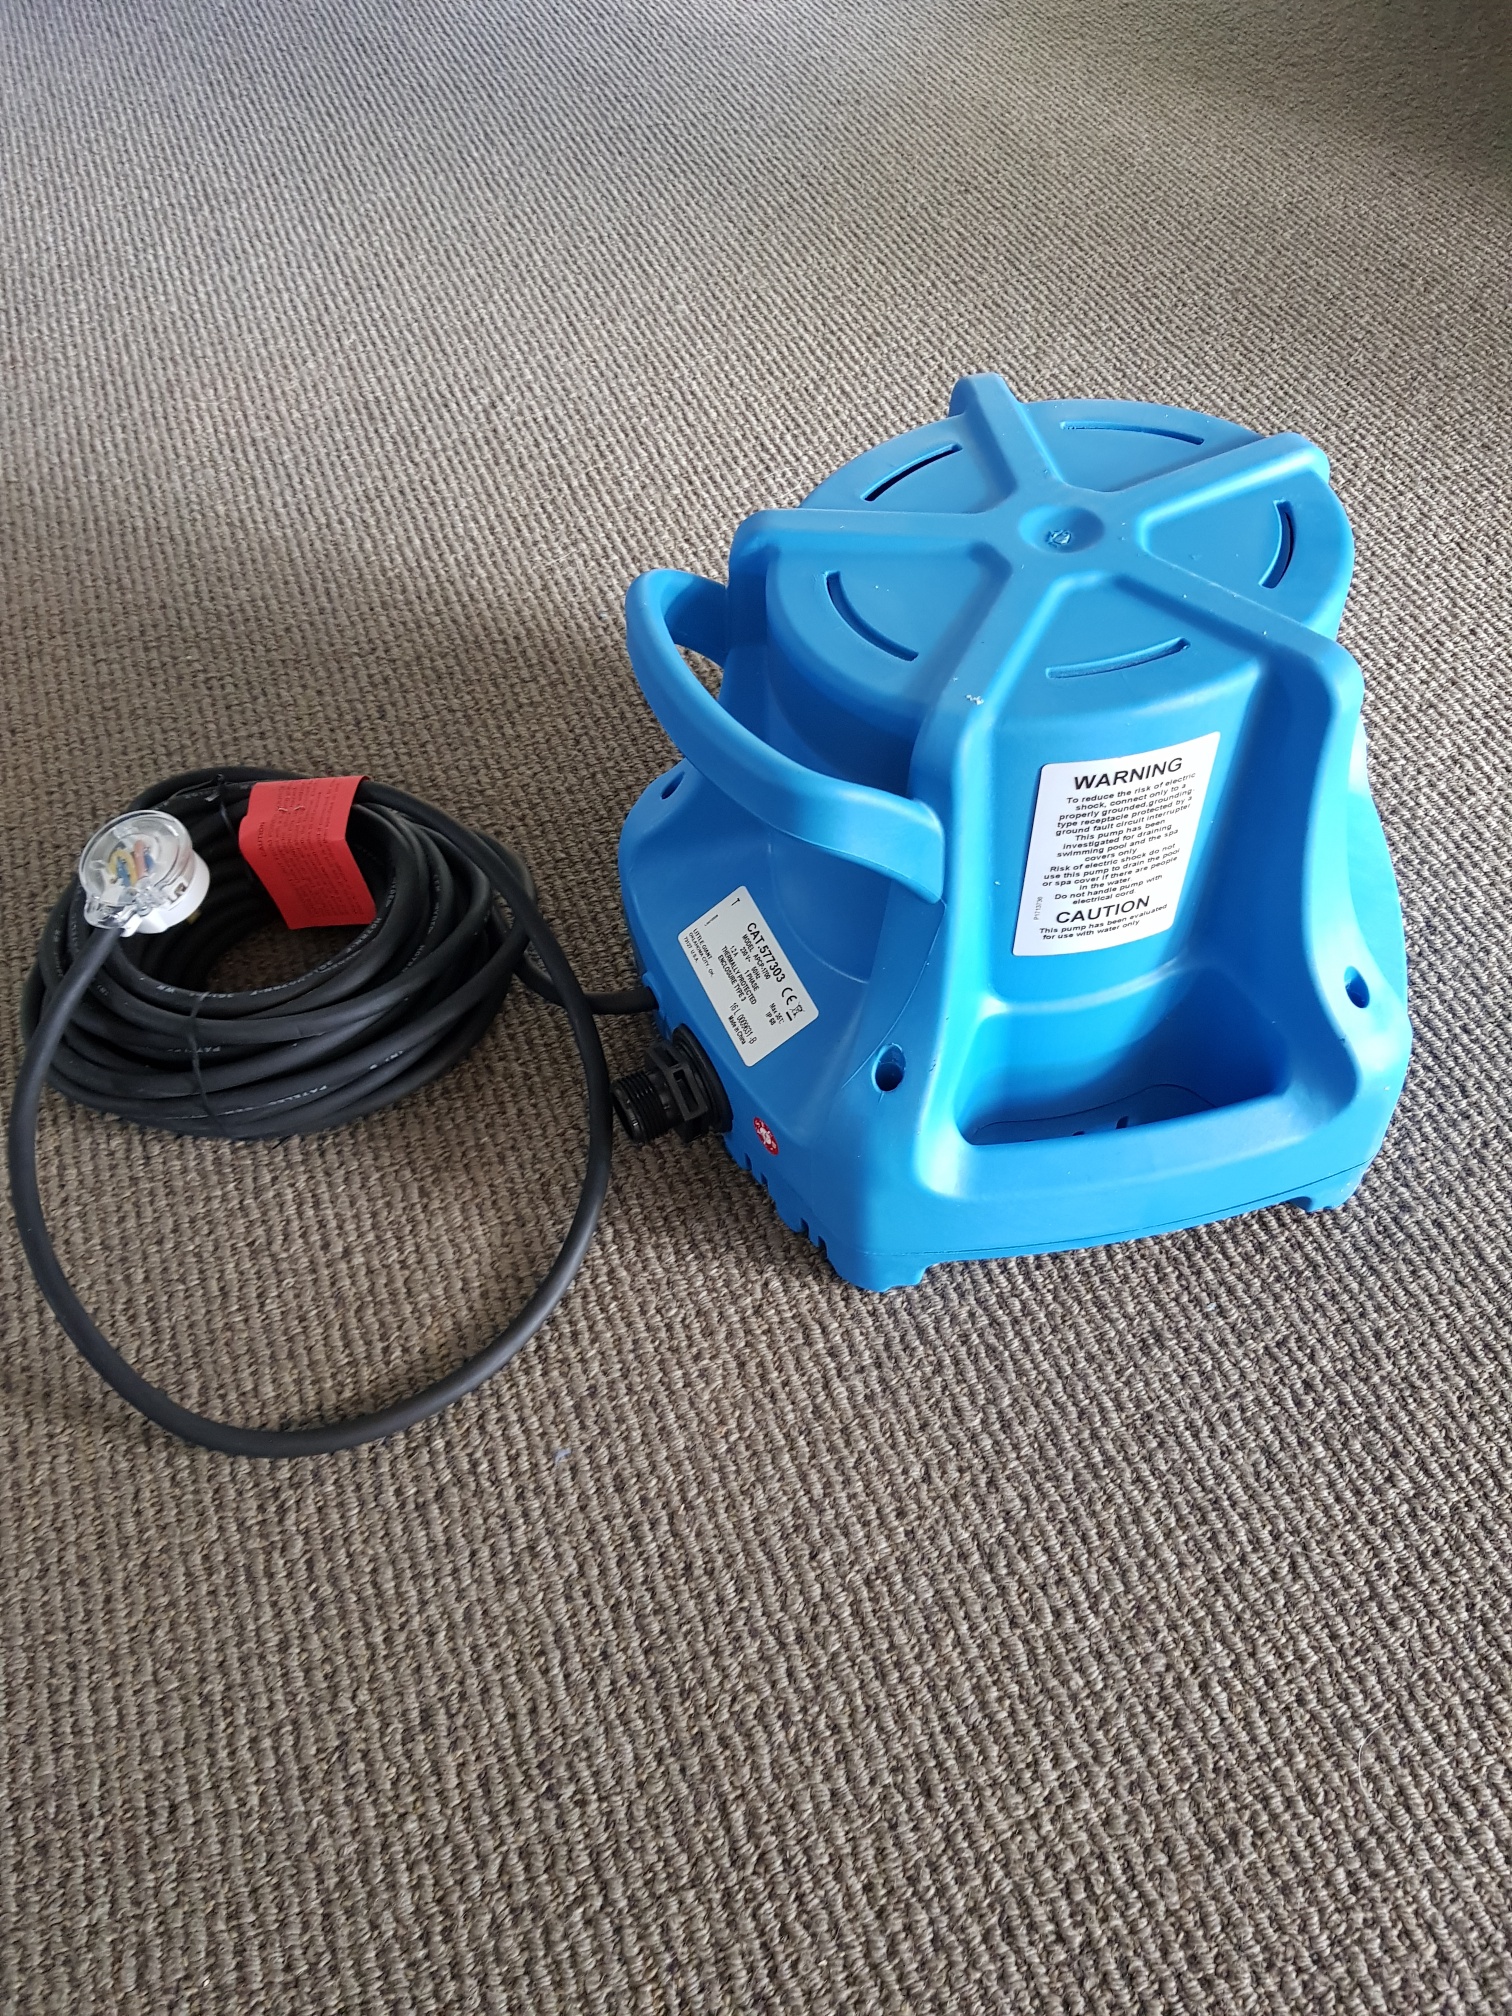 amazon automatic pool cover pump